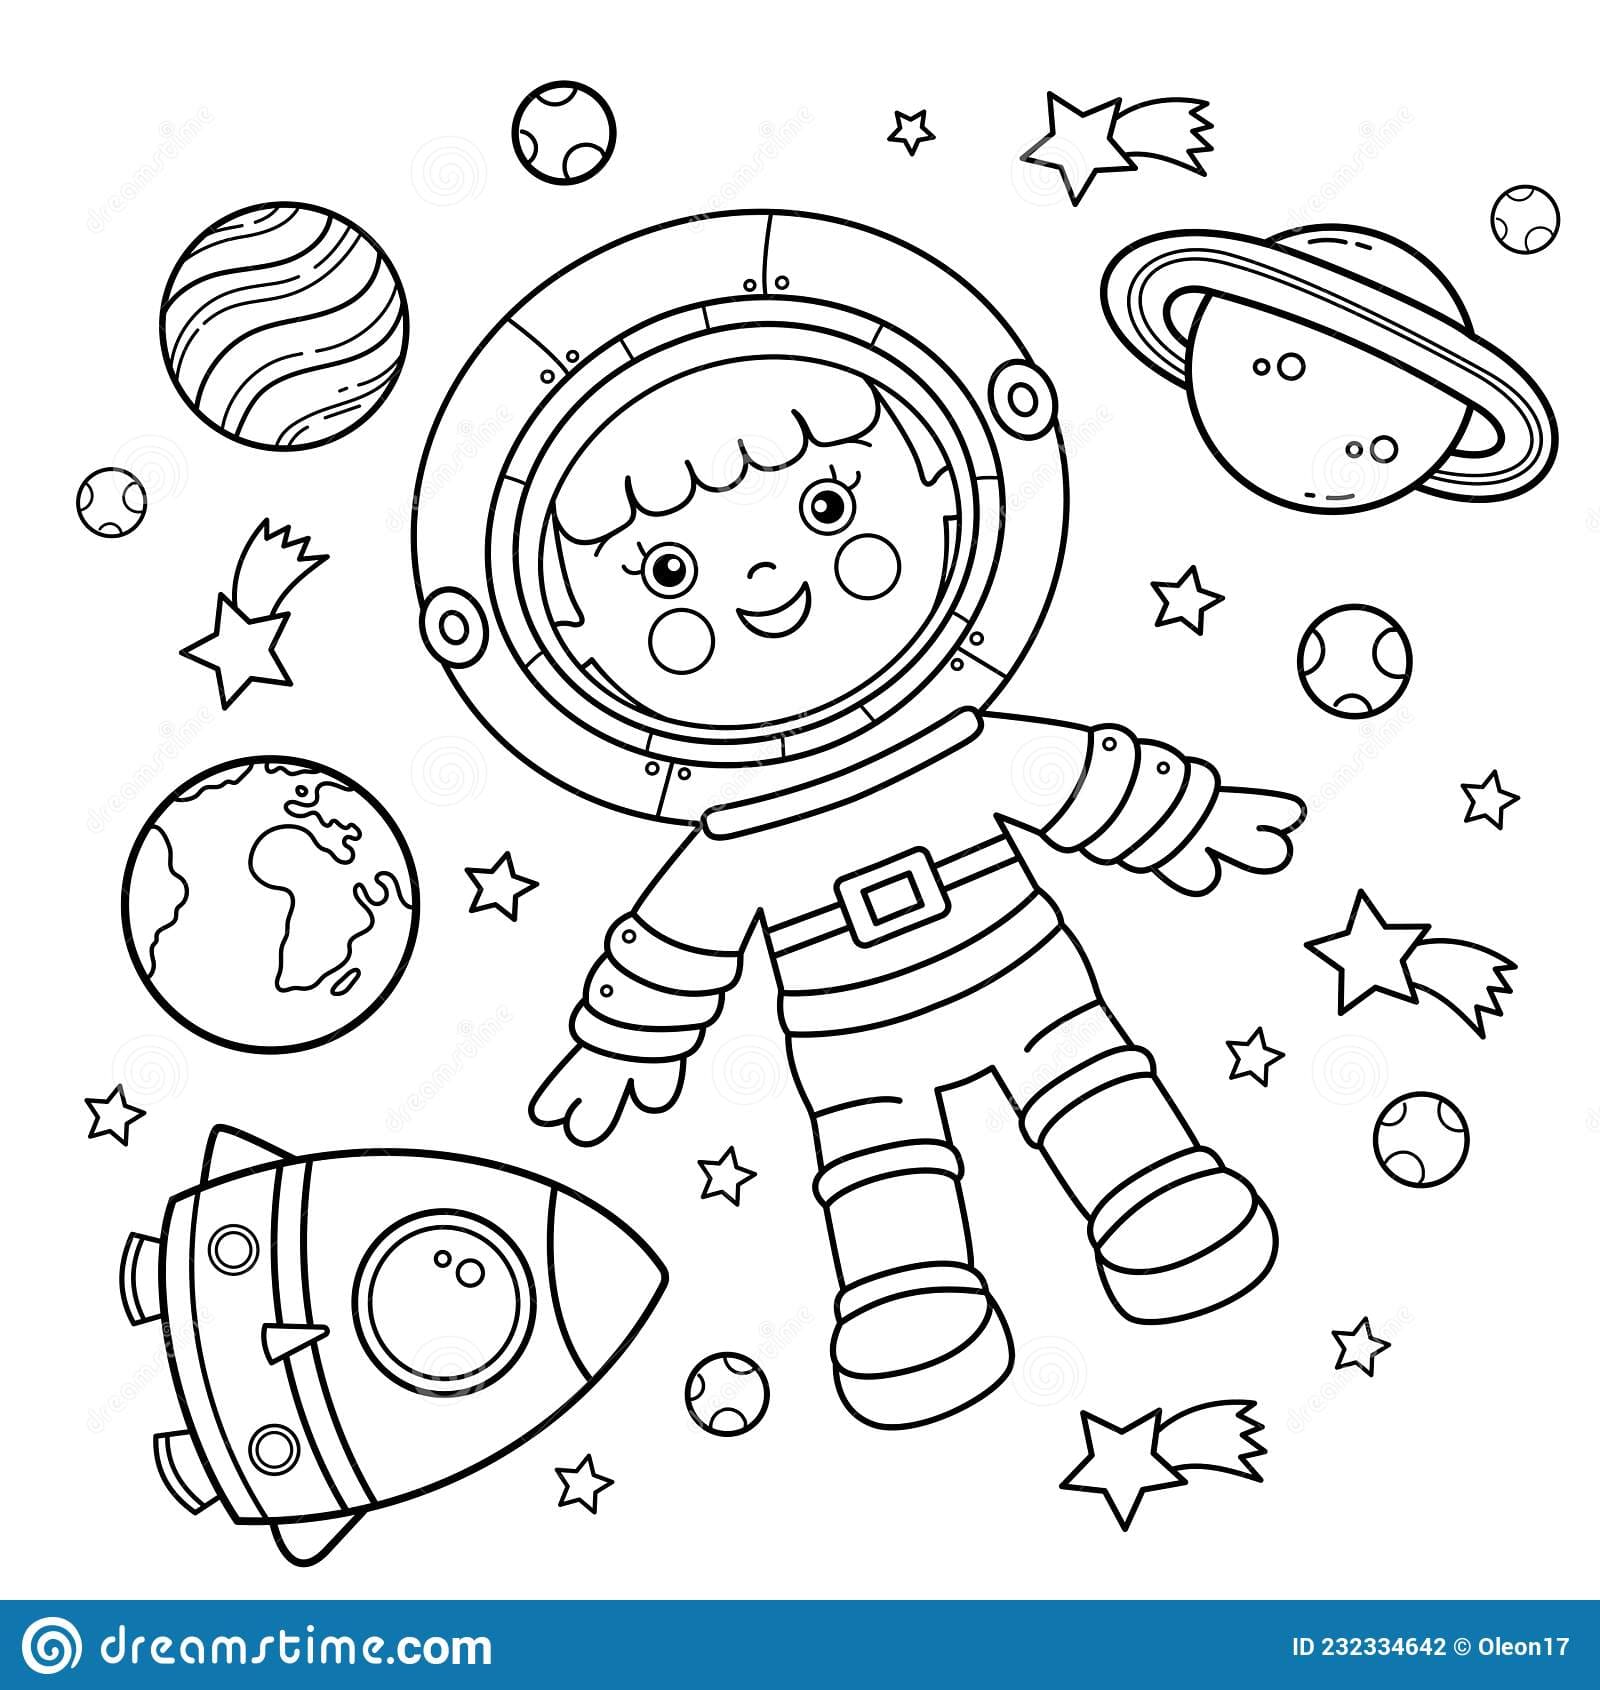 A Cartoon Astronaut with rocket in space Coloring Page